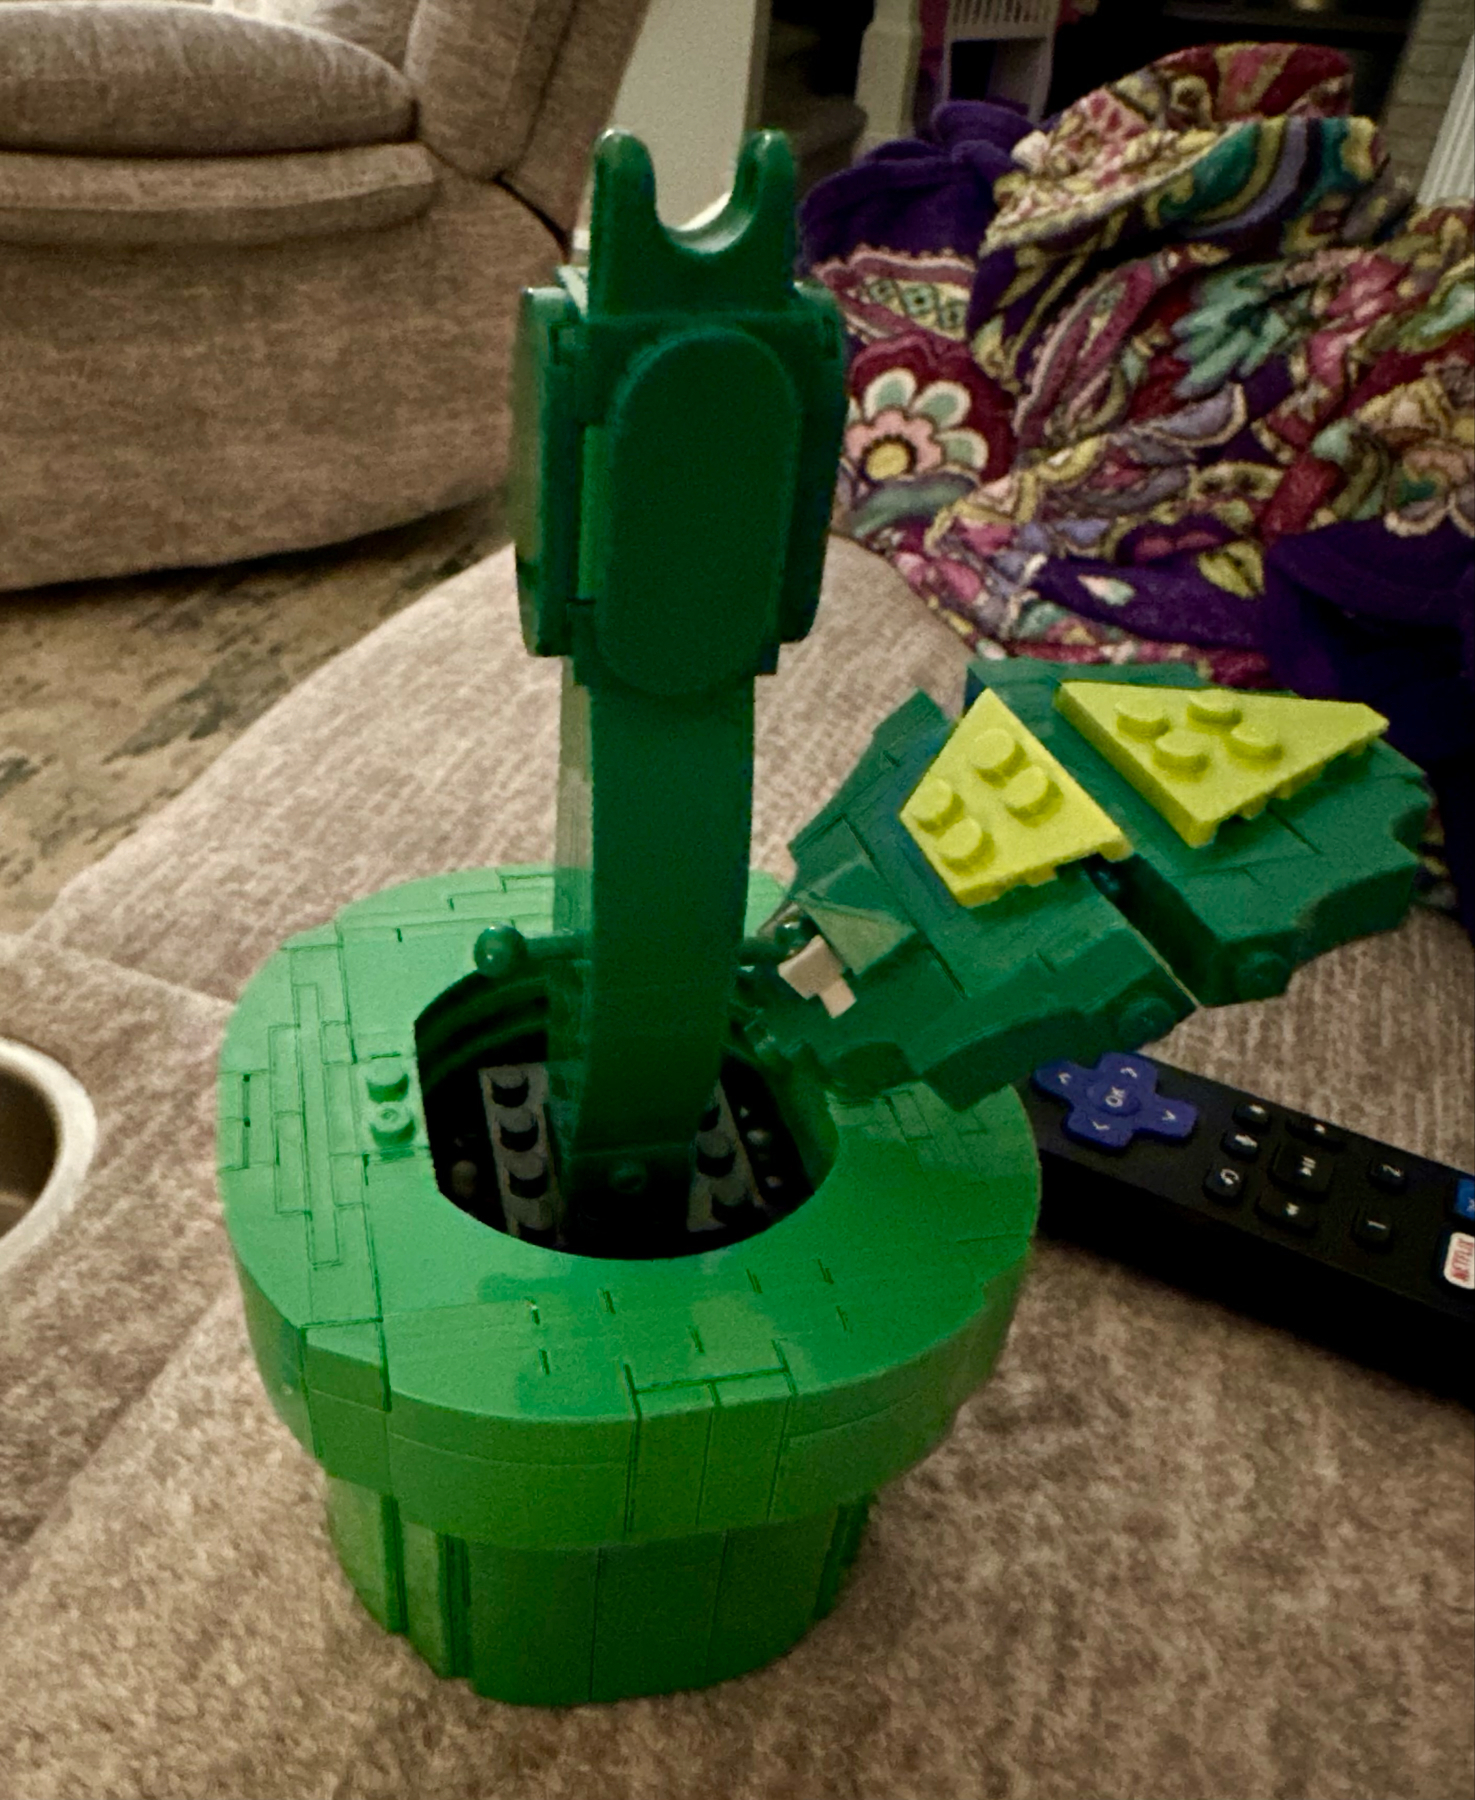 A constructed Lego model resembling a green piranha plant from the “Super Mario” series, displayed on a carpeted floor.